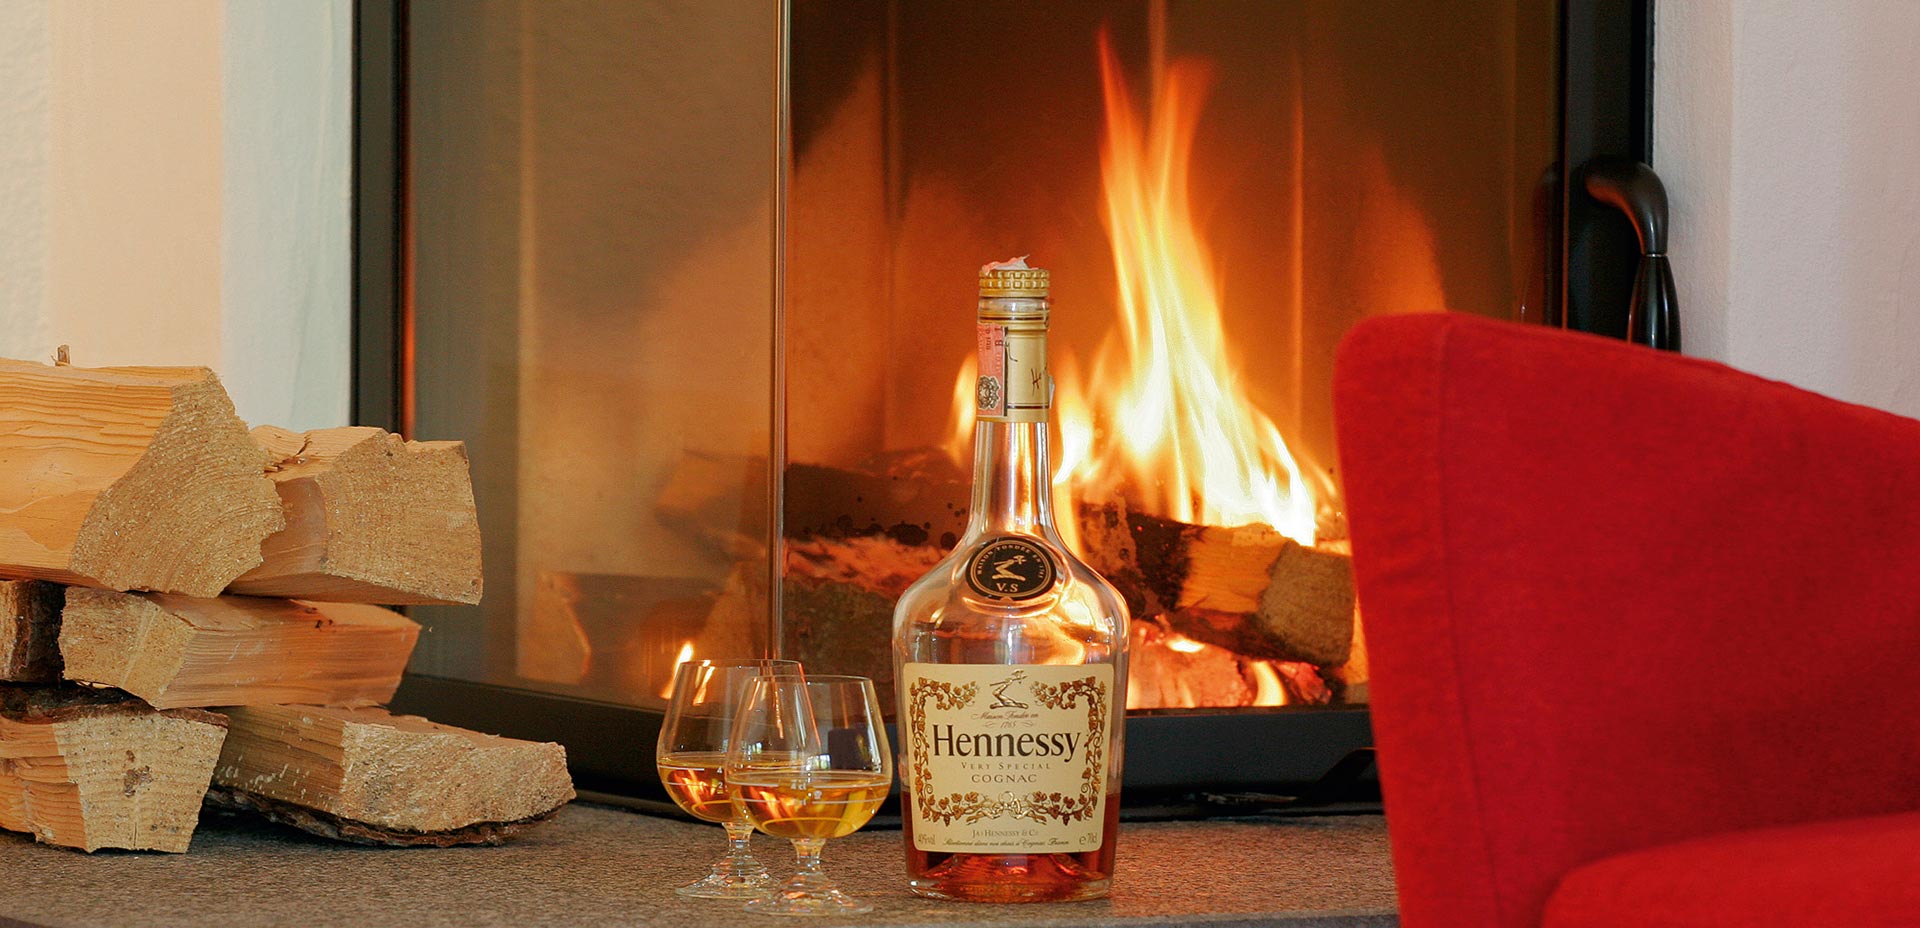 Cozy atmosphere next to the fire, with a glass of good Cognac